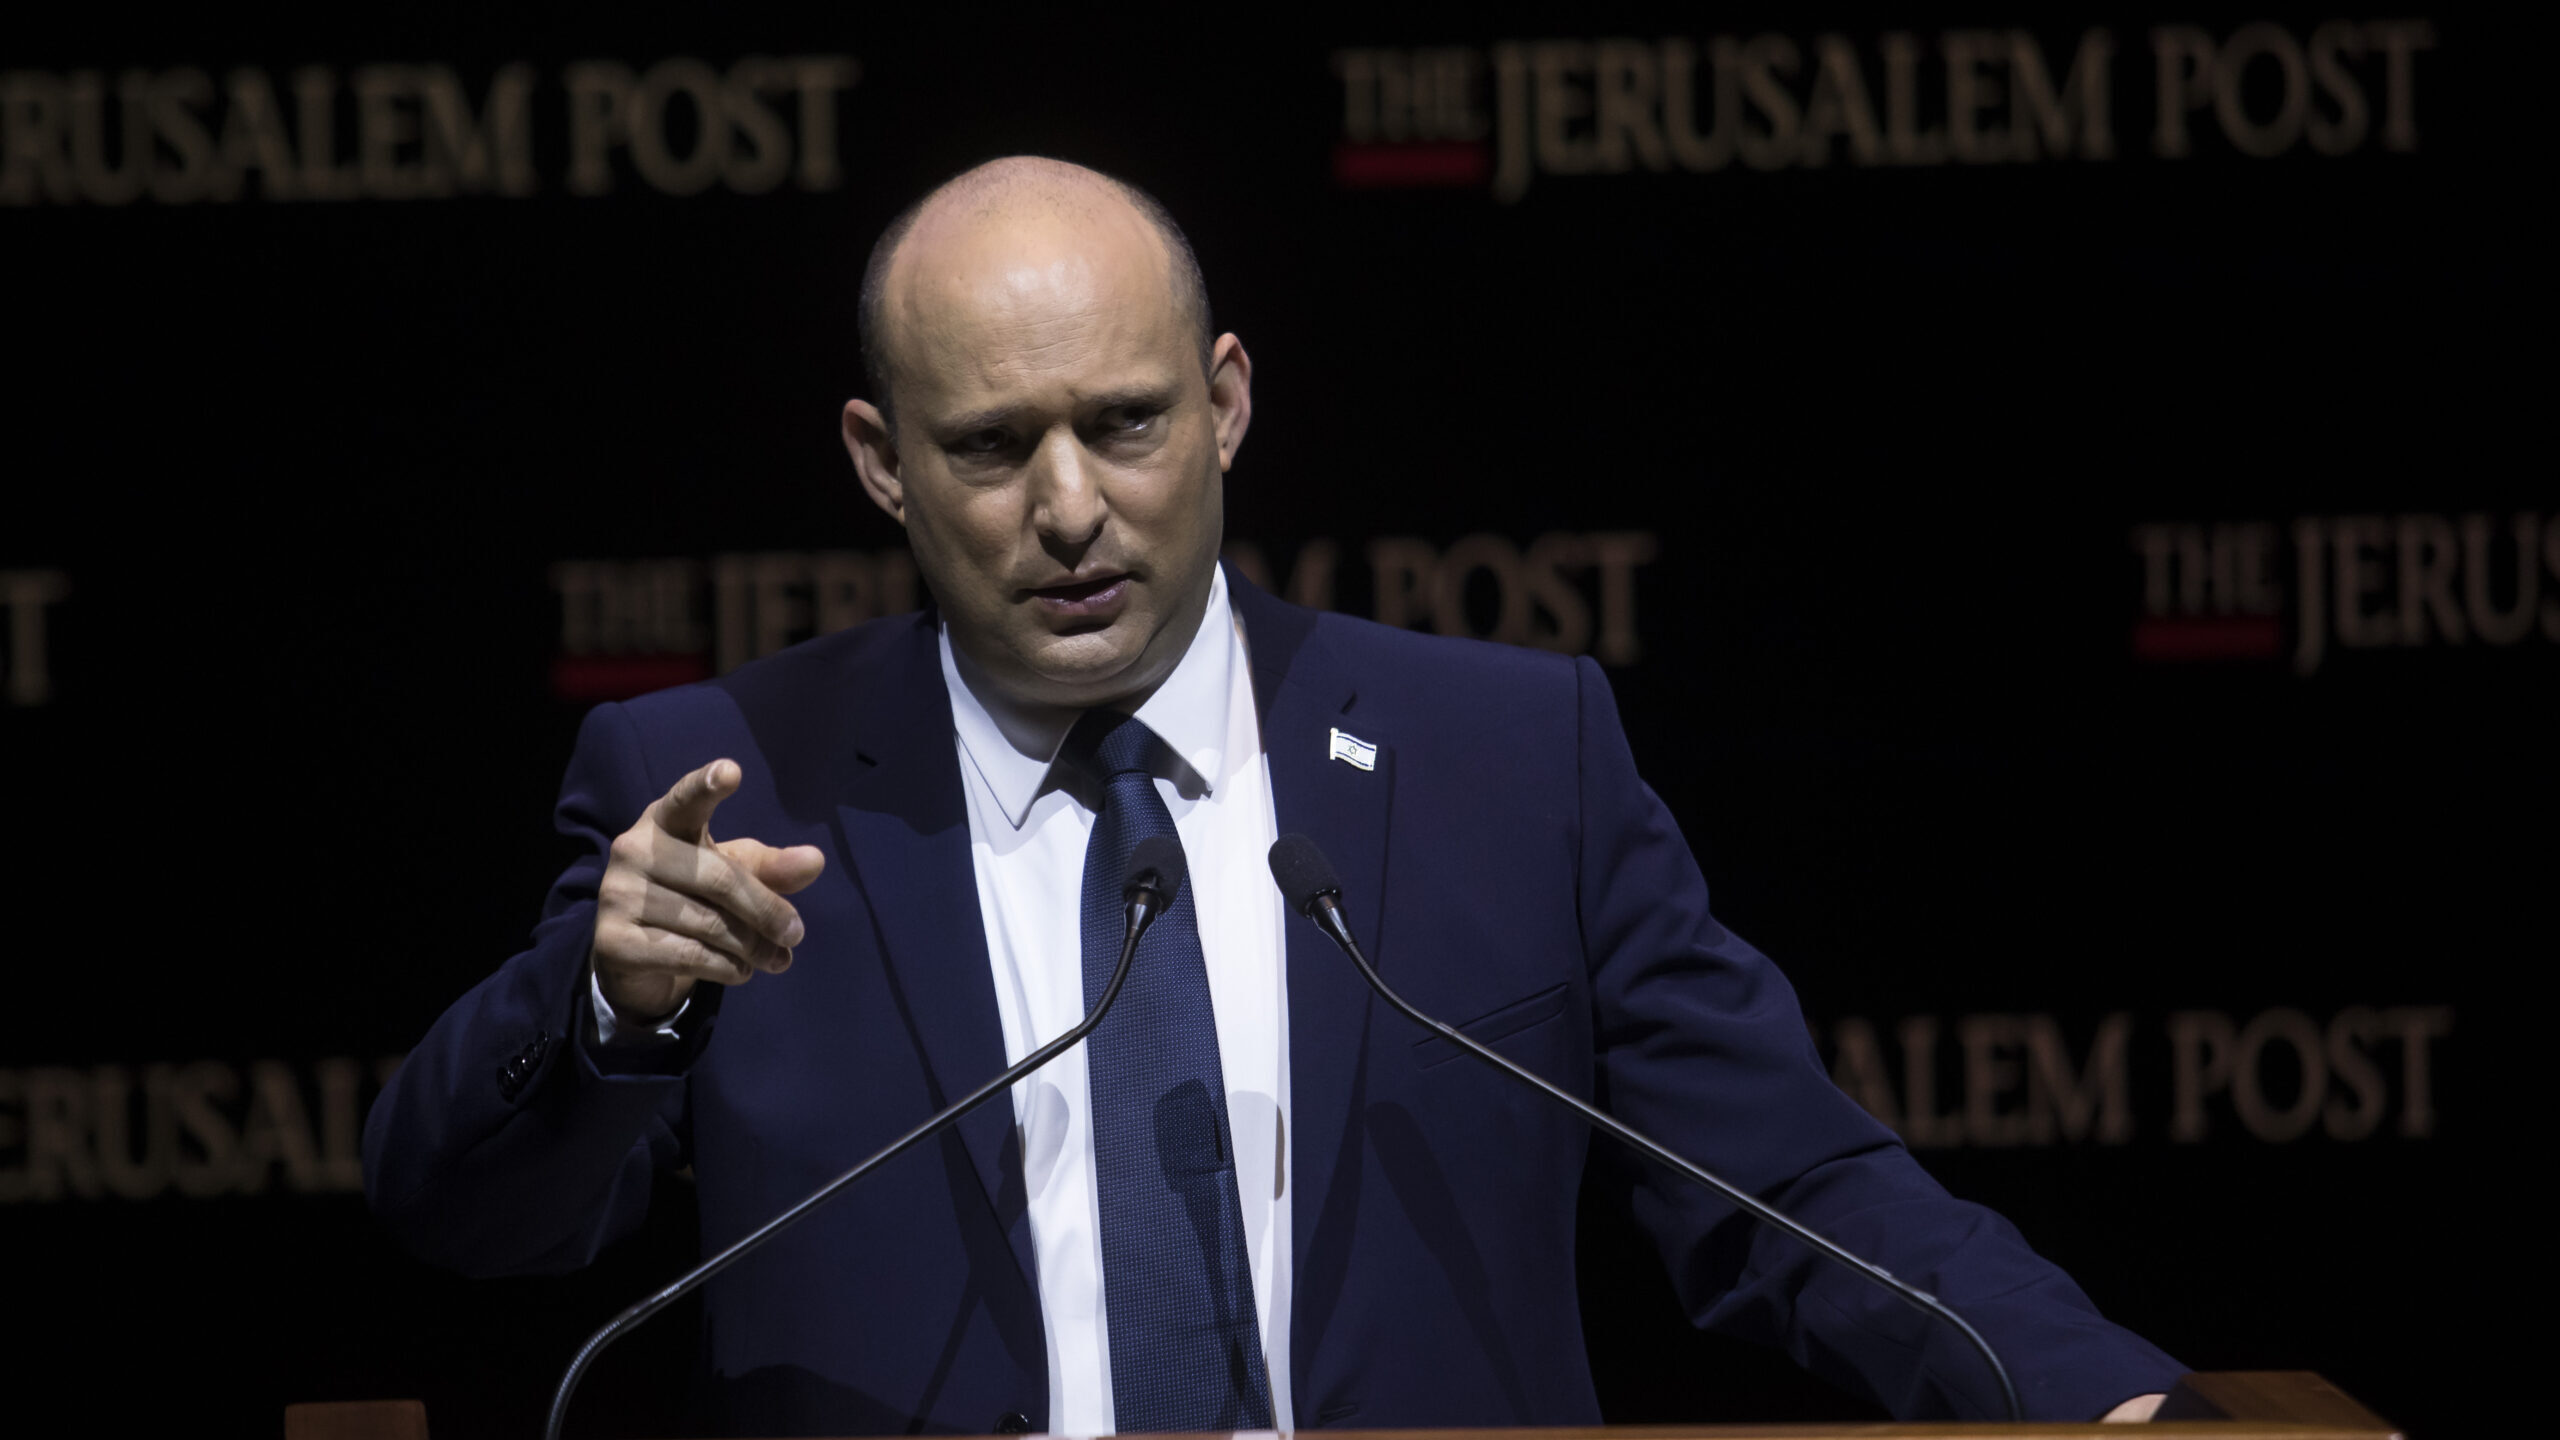 Jerusalem Post’s 10th Annual Conference